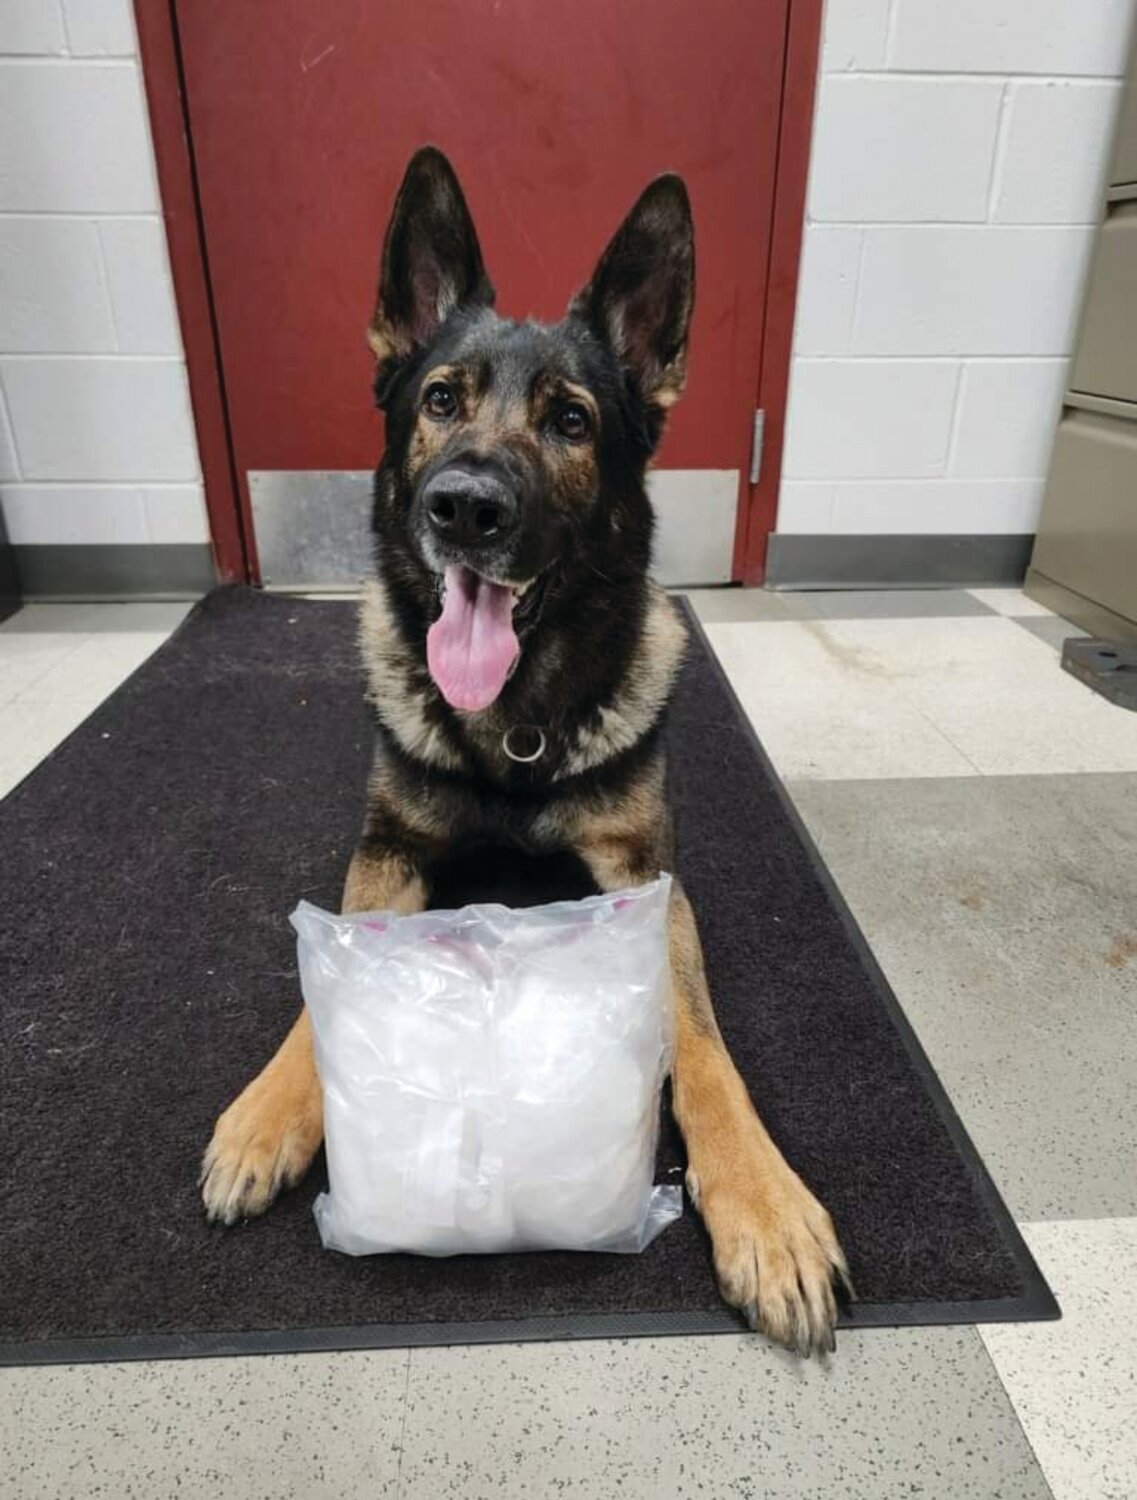 DRUG SEIZURE: Dogged law enforcement has taken two pounds of crystal methamphetamine off the city’s streets. “Warwick K9 Officer Steere and his partner had a busy month,” according to a recent Warwick Police Facebook post. A local shipping company “intercepted several suspicious packages,” according to police. “Officer Steere and K9 Garry were called to the business to help with the seizure of the suspected contraband. K9 Garry was able to positively detect the contraband and the two pounds of crystal meth will never see the streets.” The bust also led to the seizure of 23 pounds of illicit marijuana. (Photos courtesy WPD)